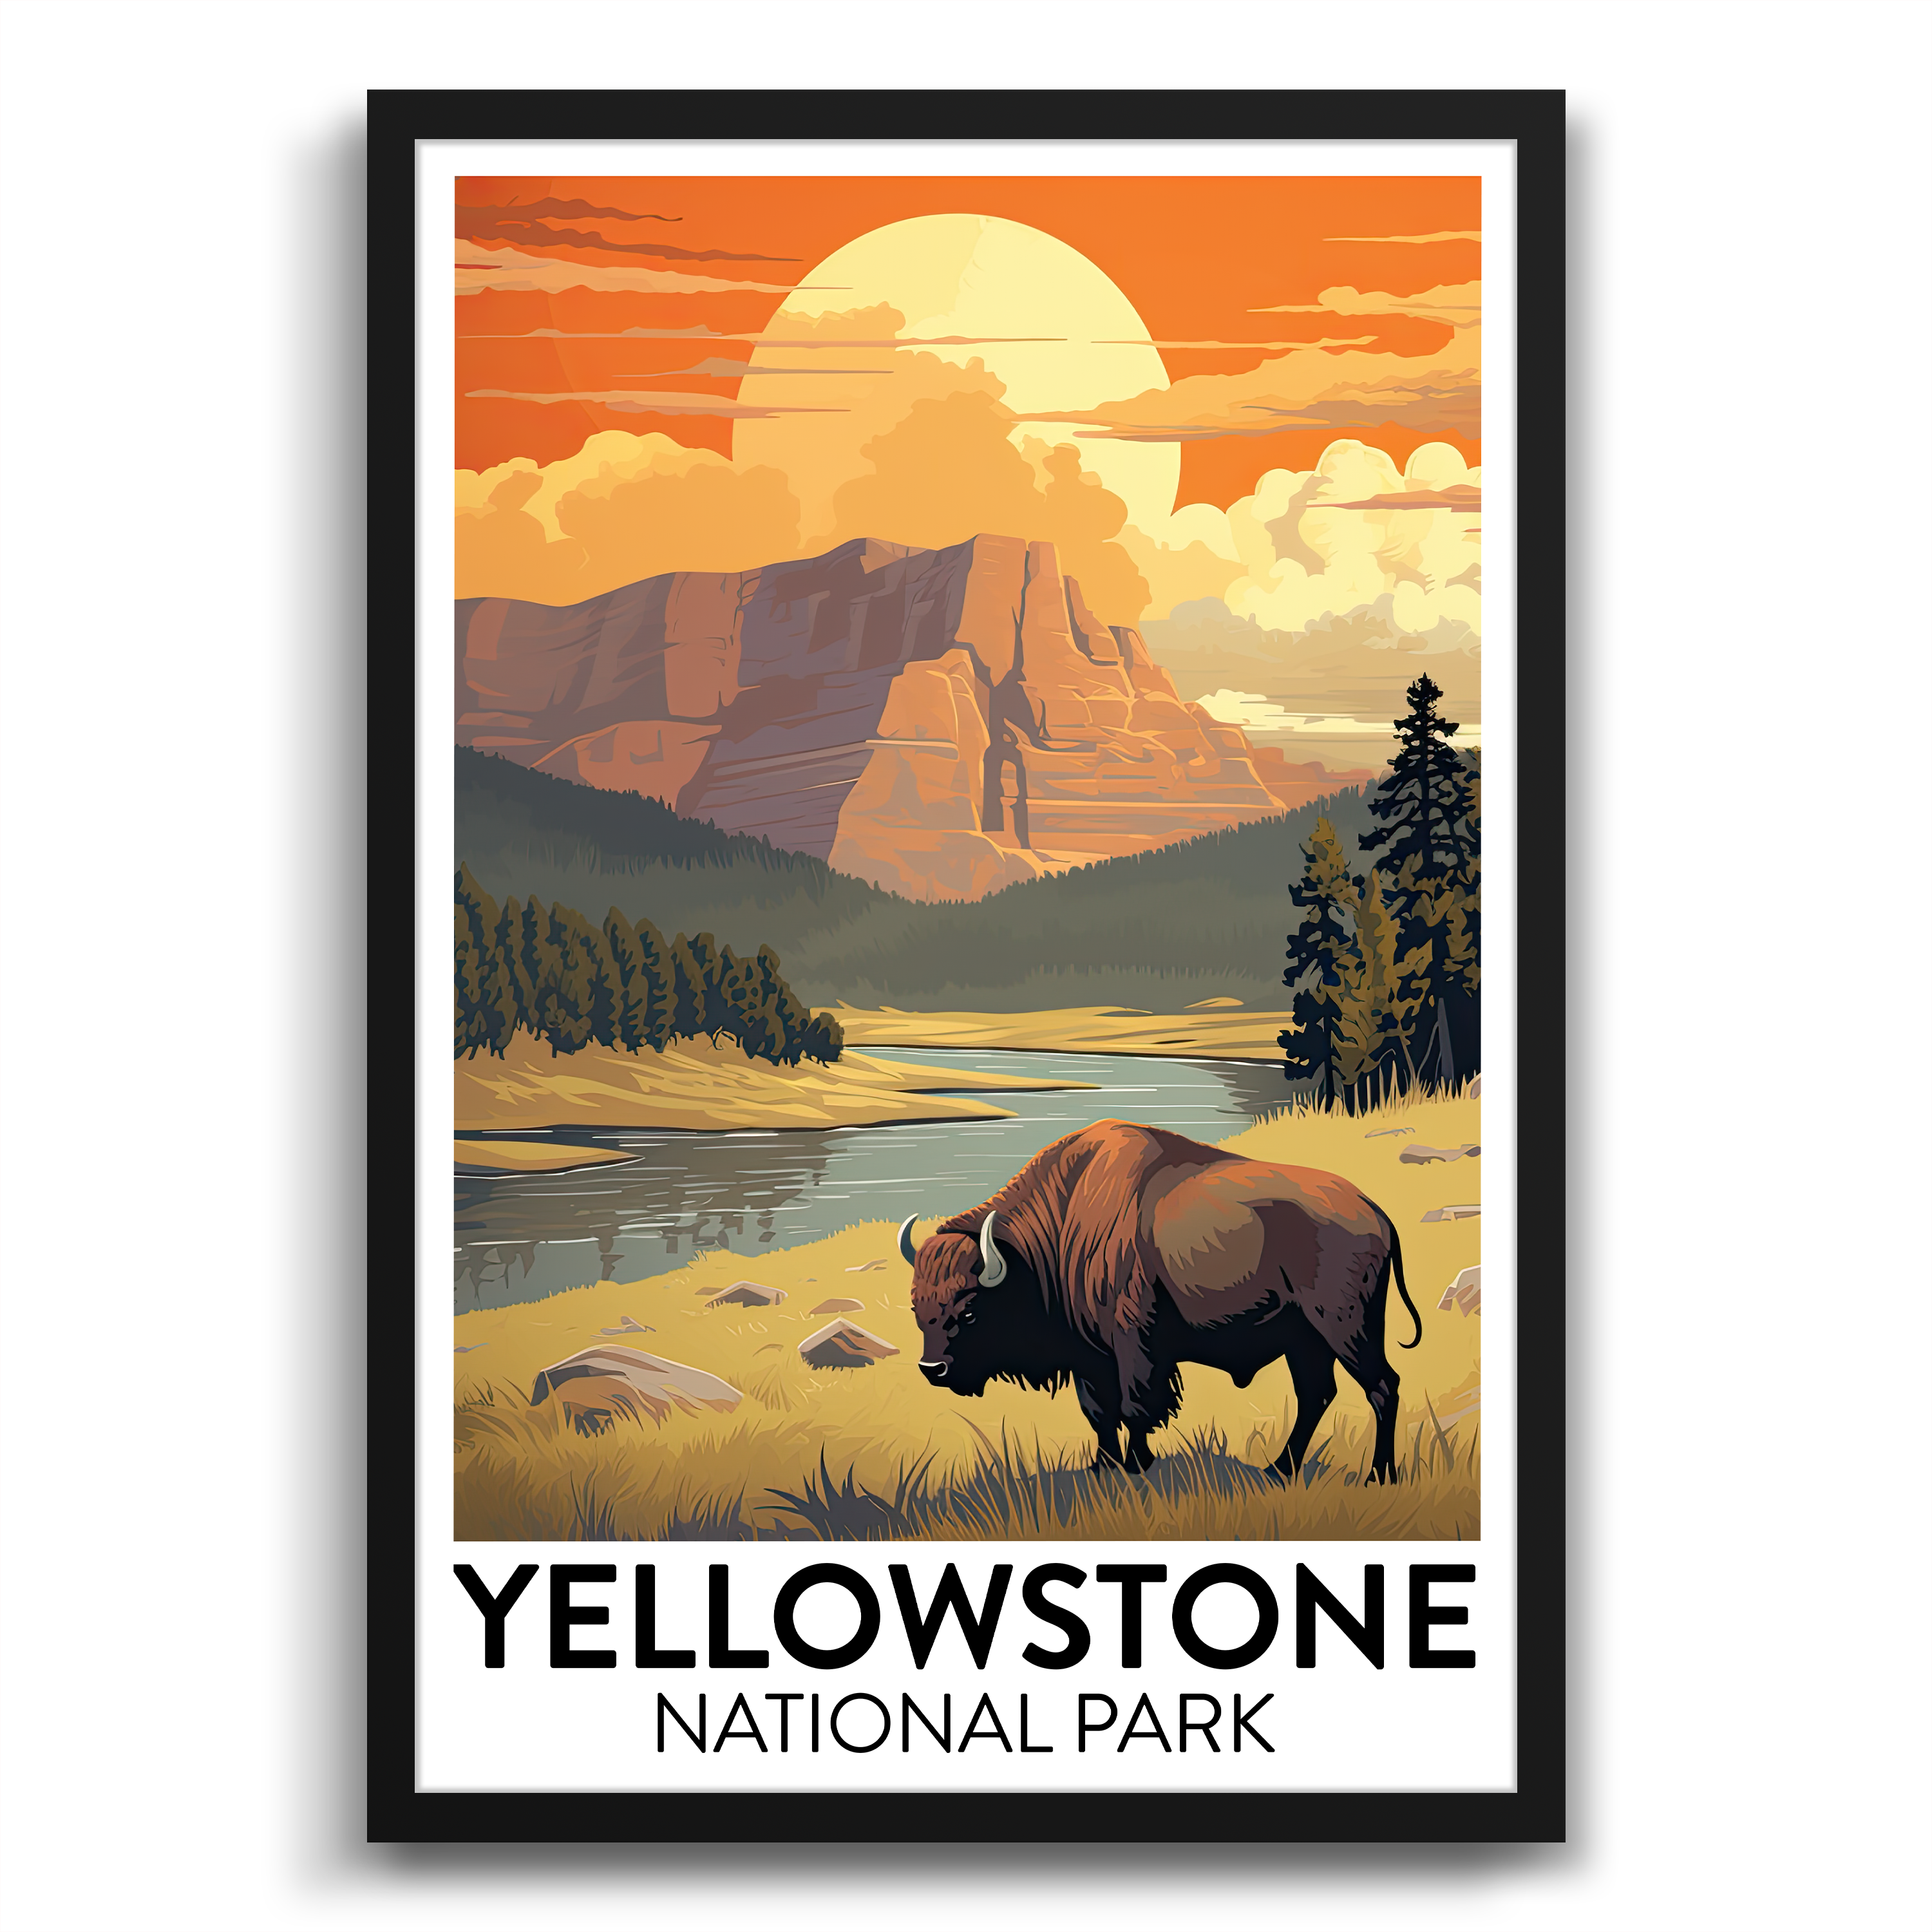 Large sun setting at yellowstone national park poster